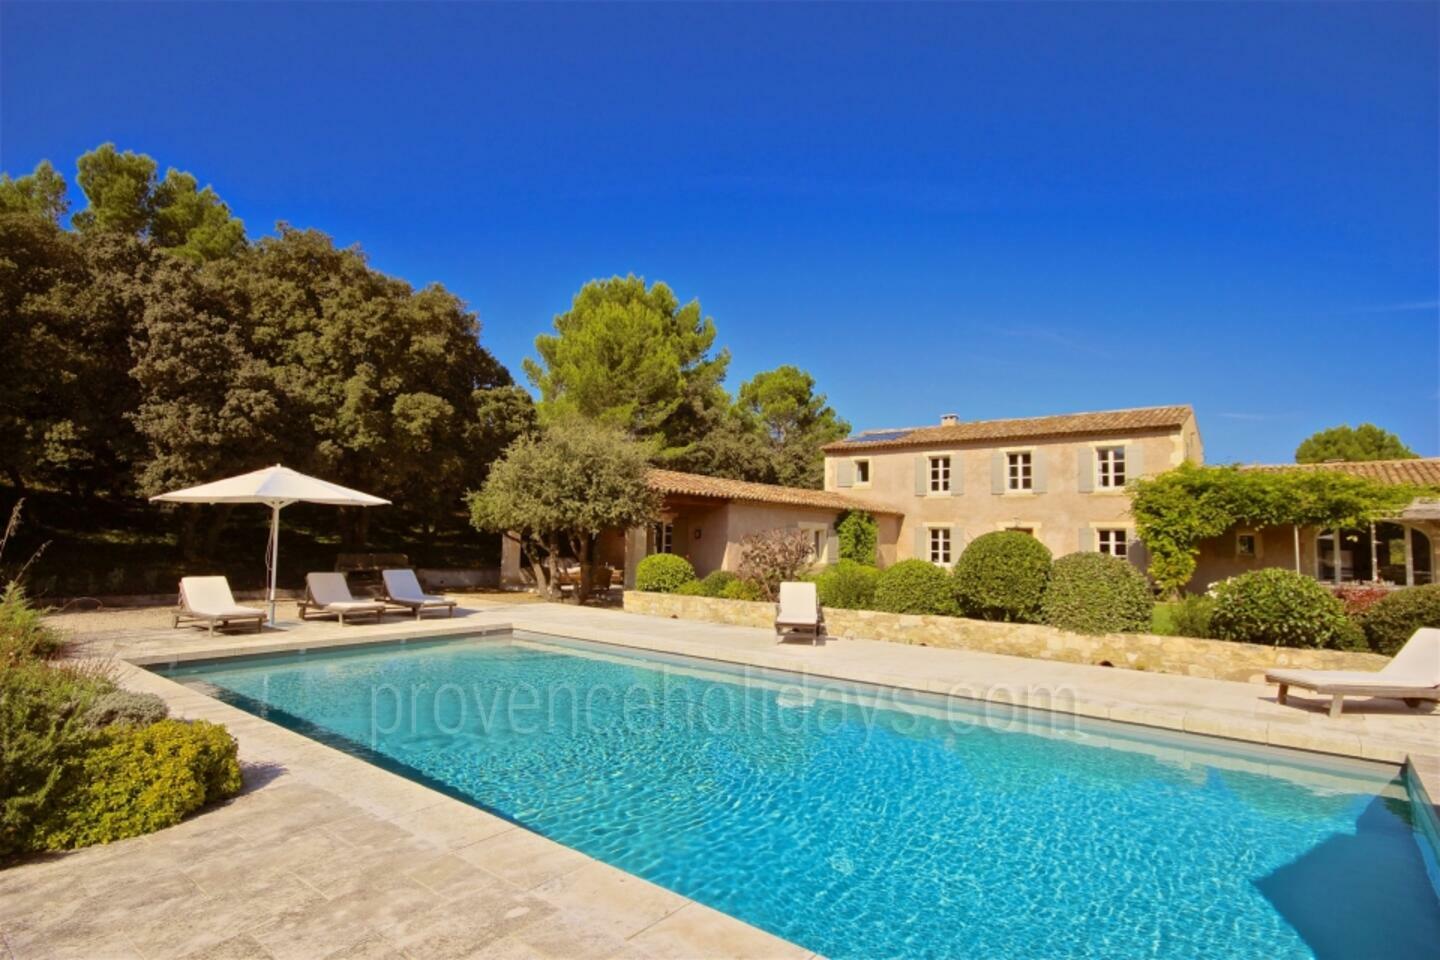 Stunning Farmhouse with Private Tennis Court in Eygalières -1 - Mas Tranquil: Villa: Pool